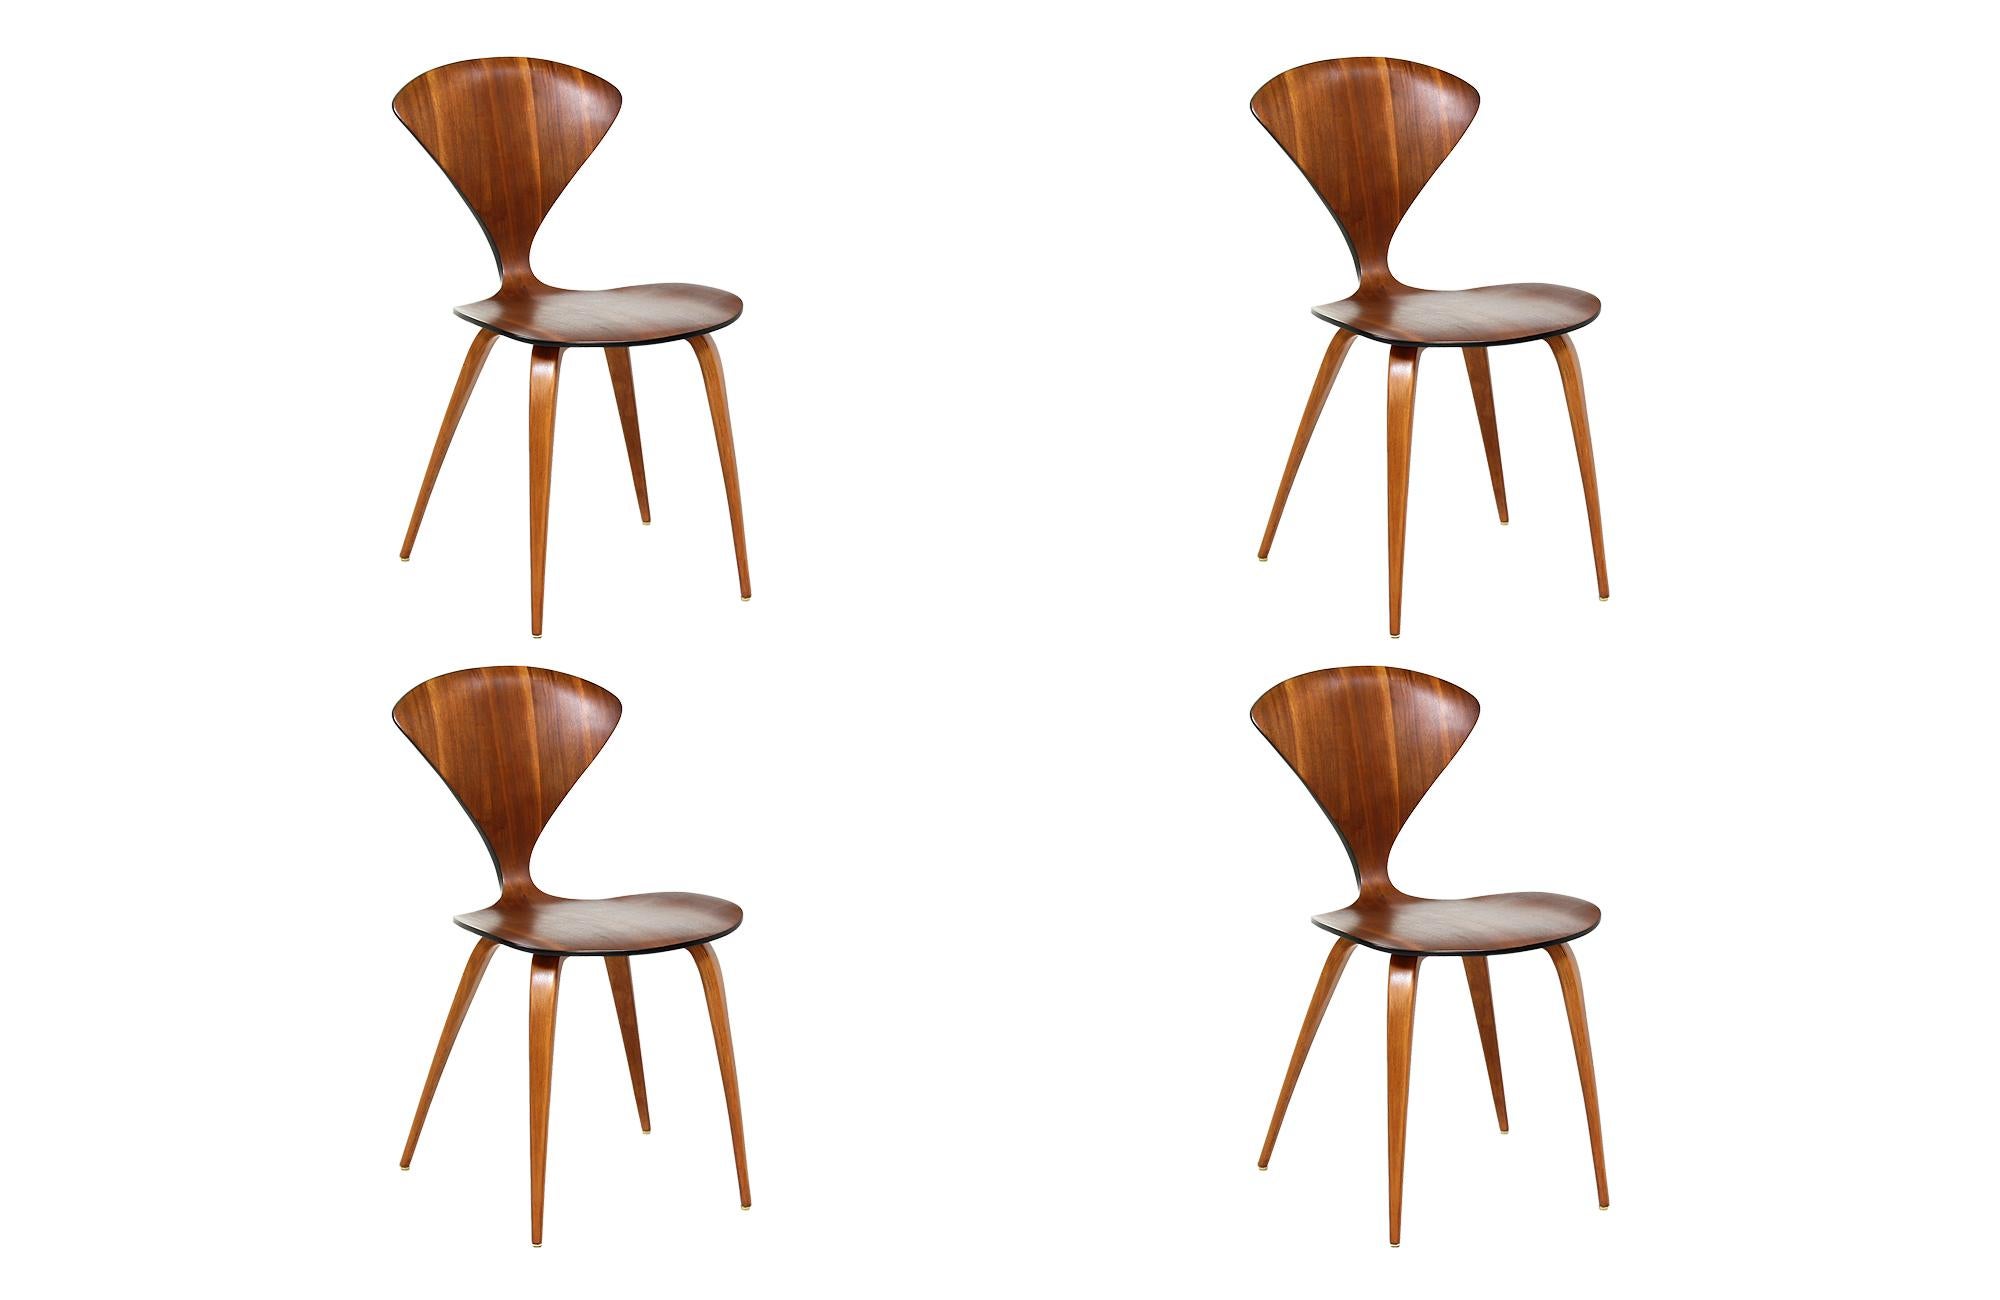 Iconic dining chairs designed by Norman Cherner for Plycraft in the United States in 1958. This set of four dining chairs are an early model of Cherners design as they maintain the original Plycraft label with the fabricated name, Bernardo as the